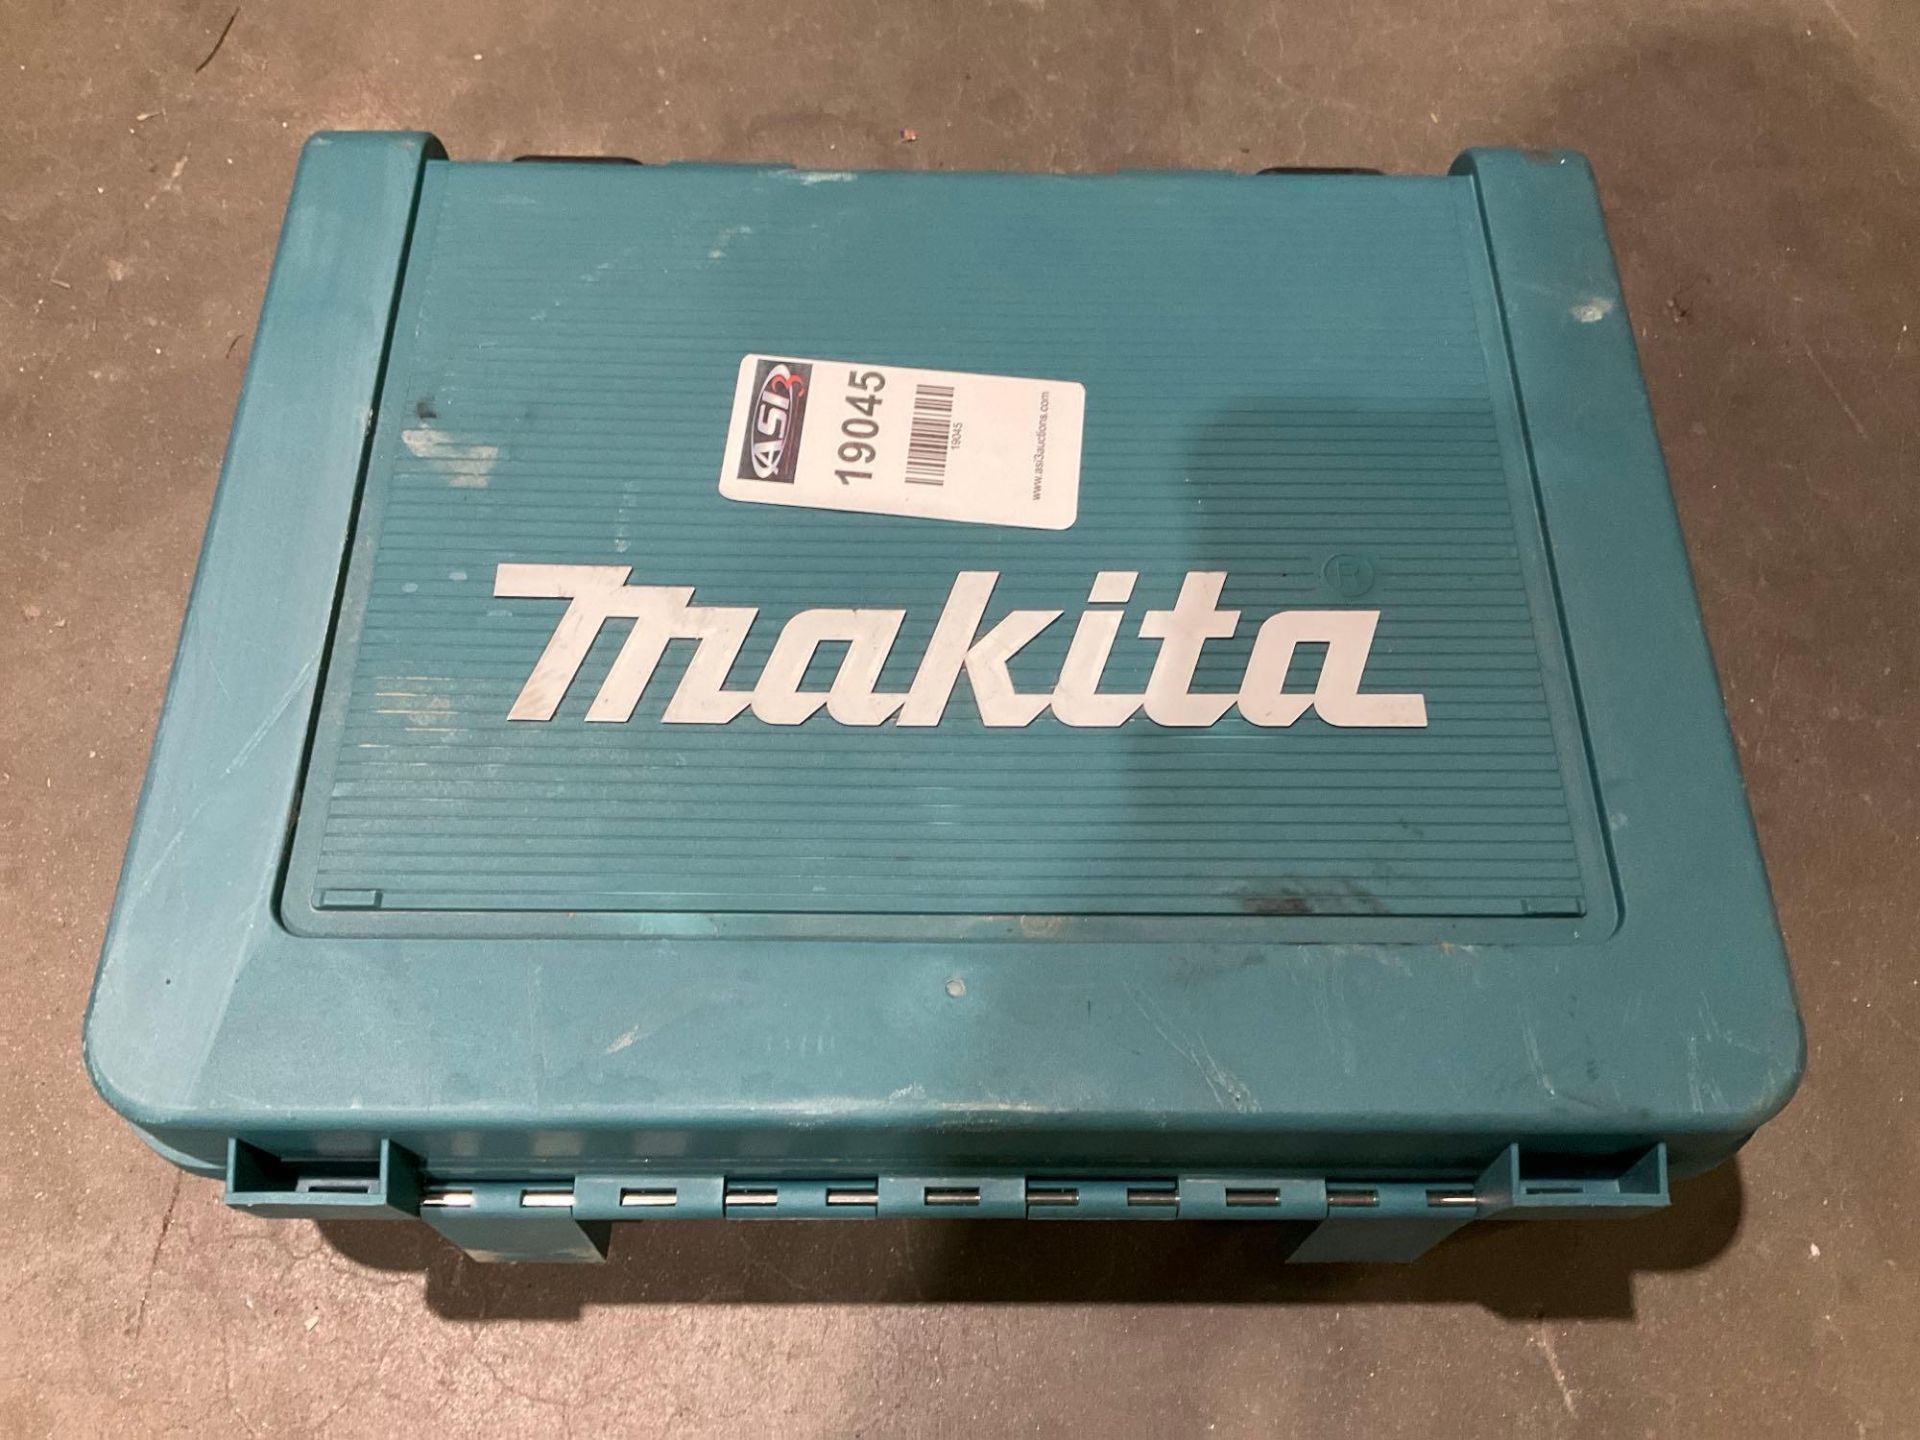 MAKITA ROTARY HAMMER MODEL HR2811F IN CARRYING CASE, RECONDITIONED - Image 5 of 5